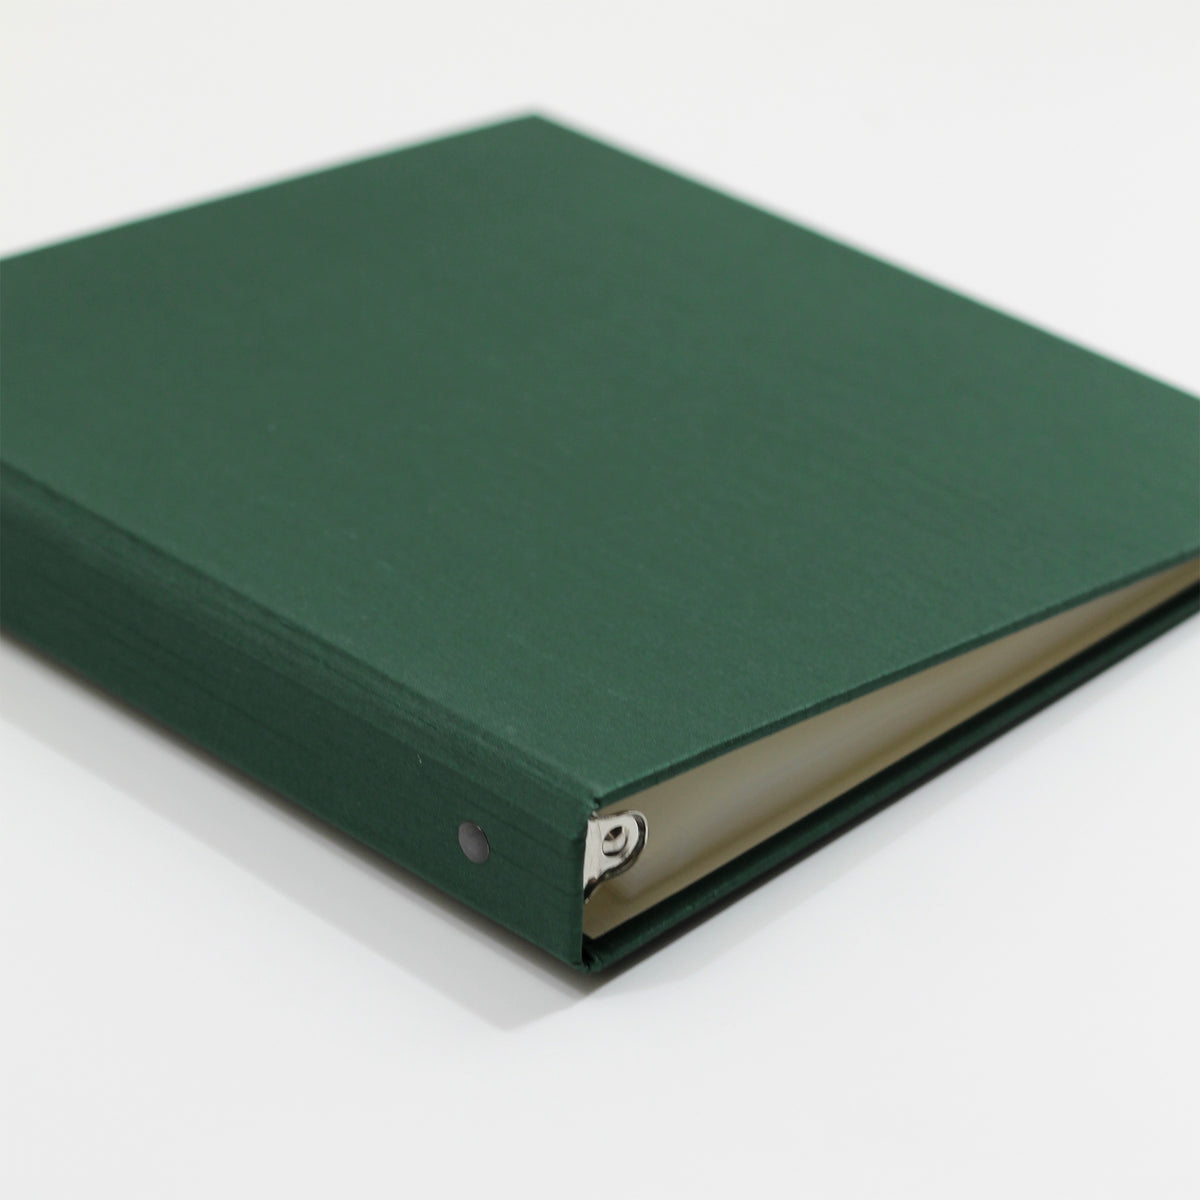 Photo Binder (for 5x7 photos) with Emerald Silk Cover